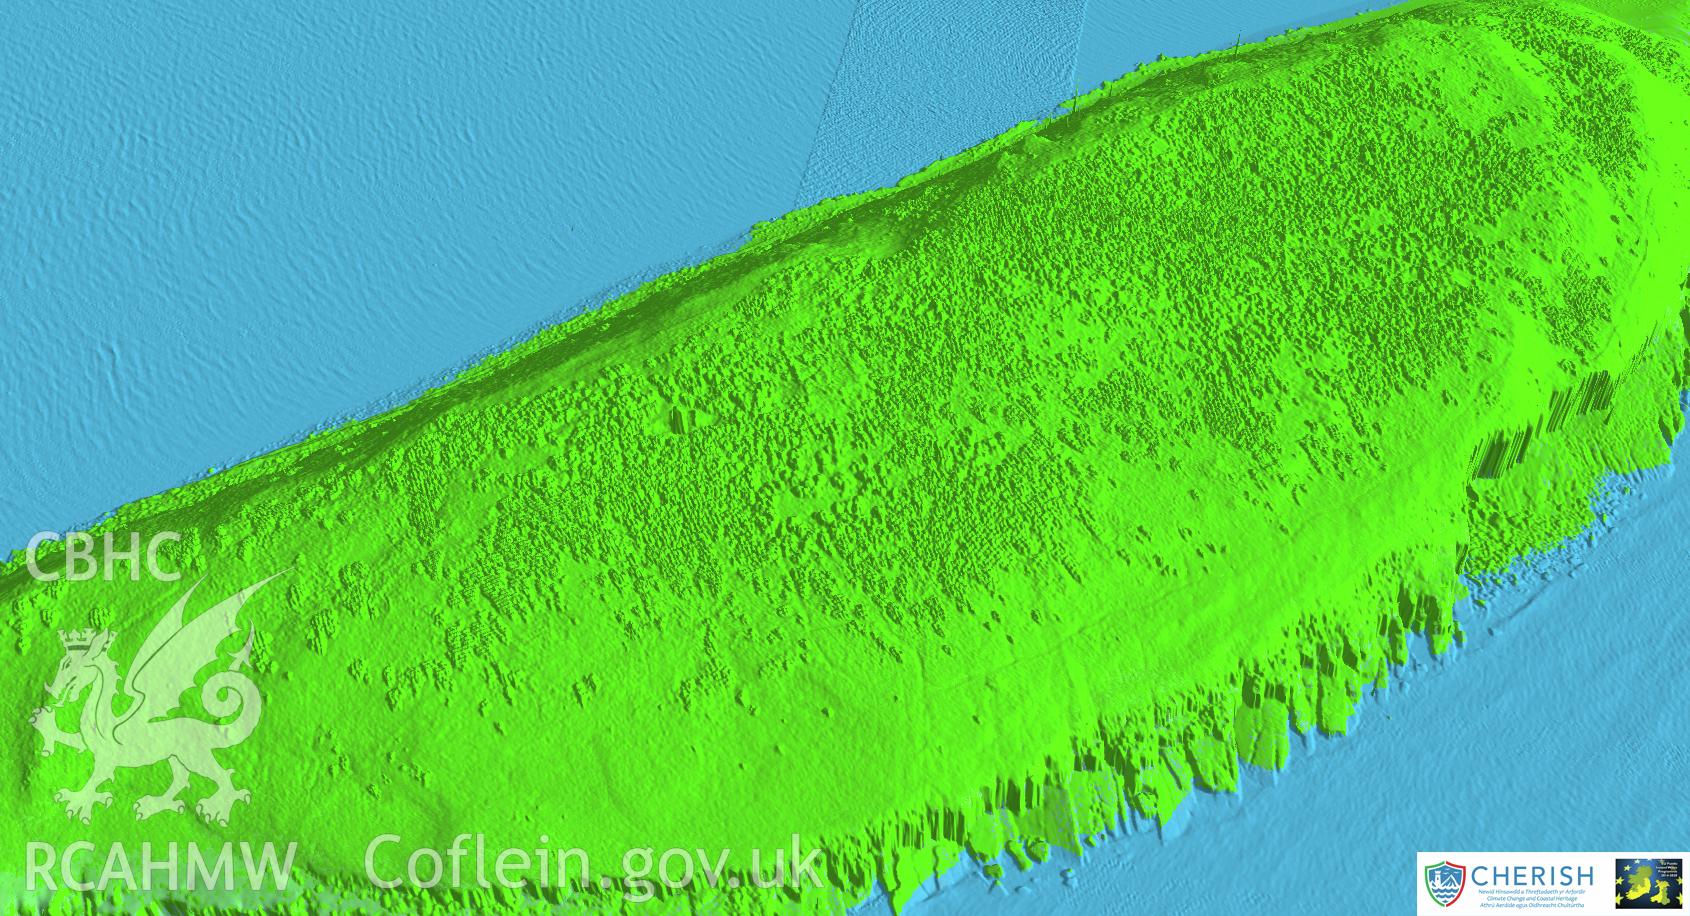 Ynys Seiriol (Puffin Island). Airborne laser scanning (LiDAR) commissioned by the CHERISH Project 2017-2021, flown by Bluesky International LTD at low tide on 24th February 2017.